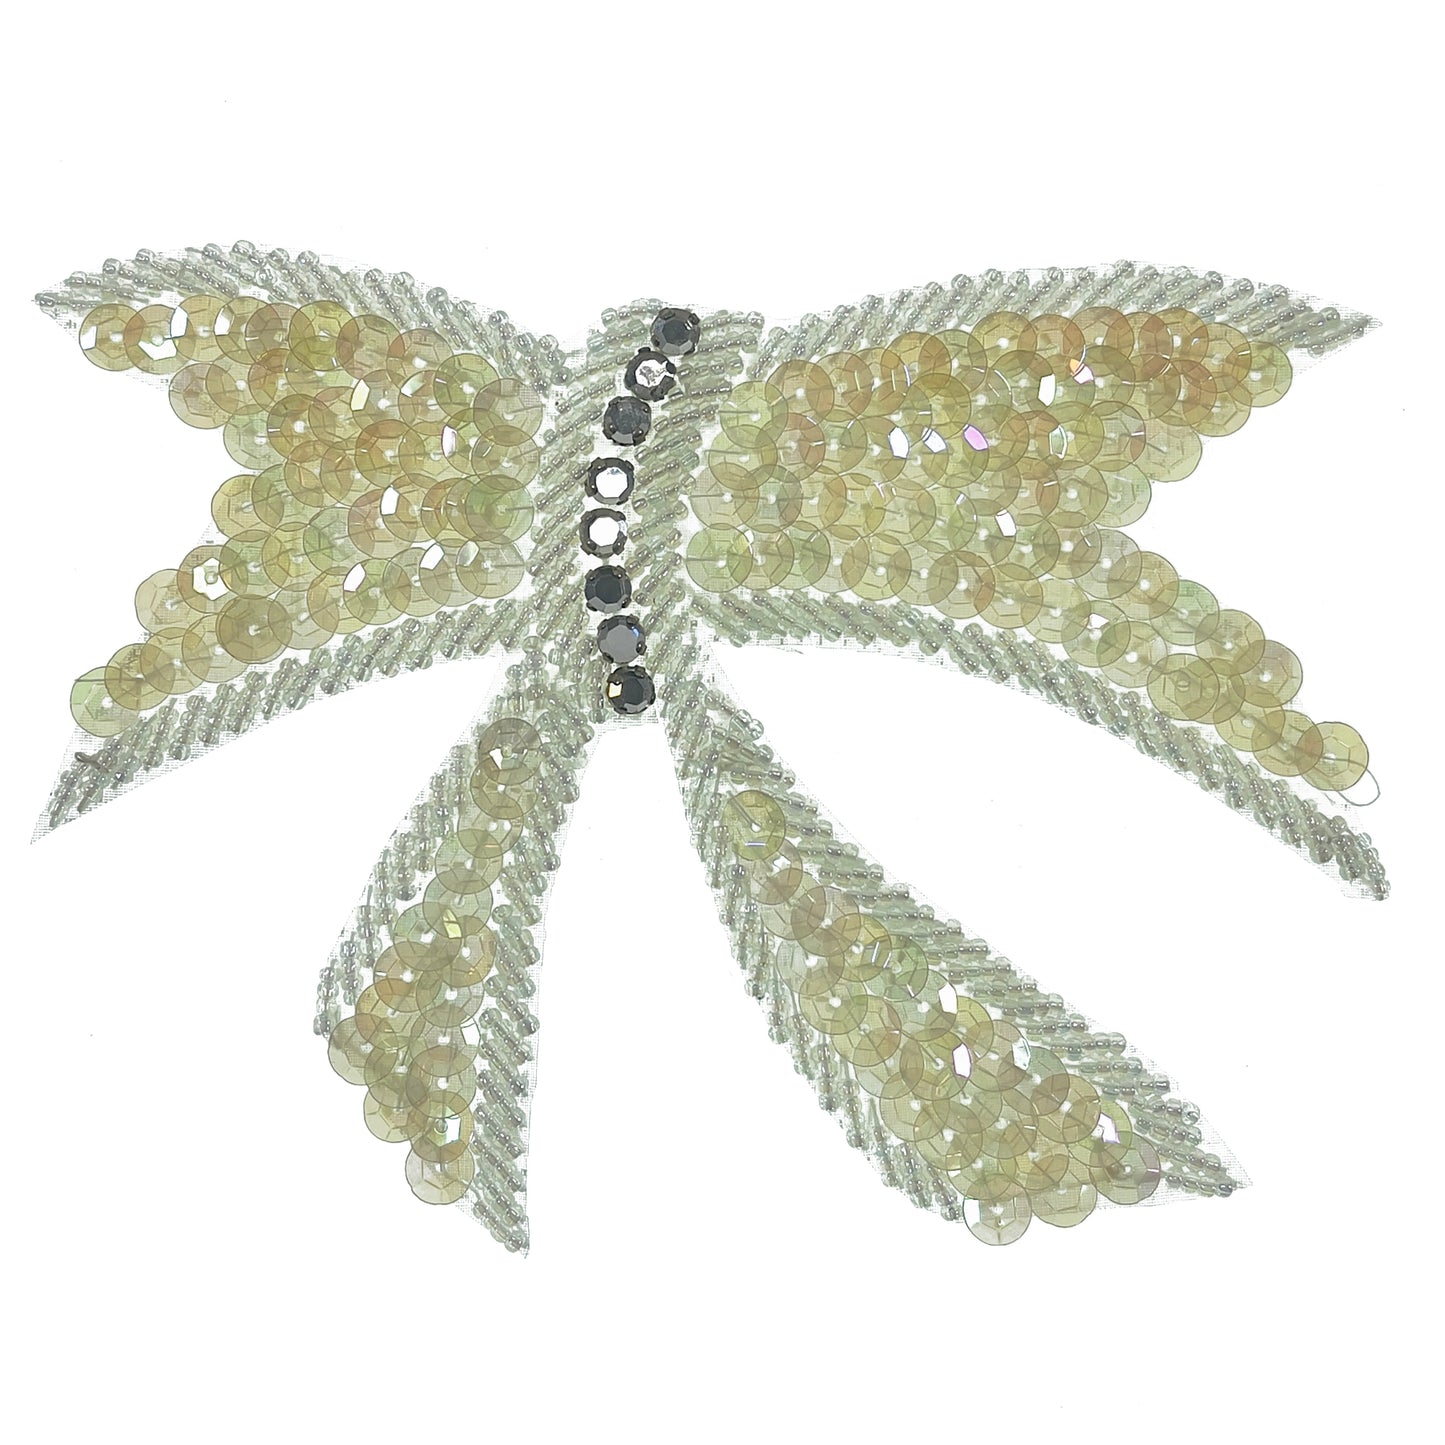 Knotted Bow Sequin Applique/Patch 5" x 4"